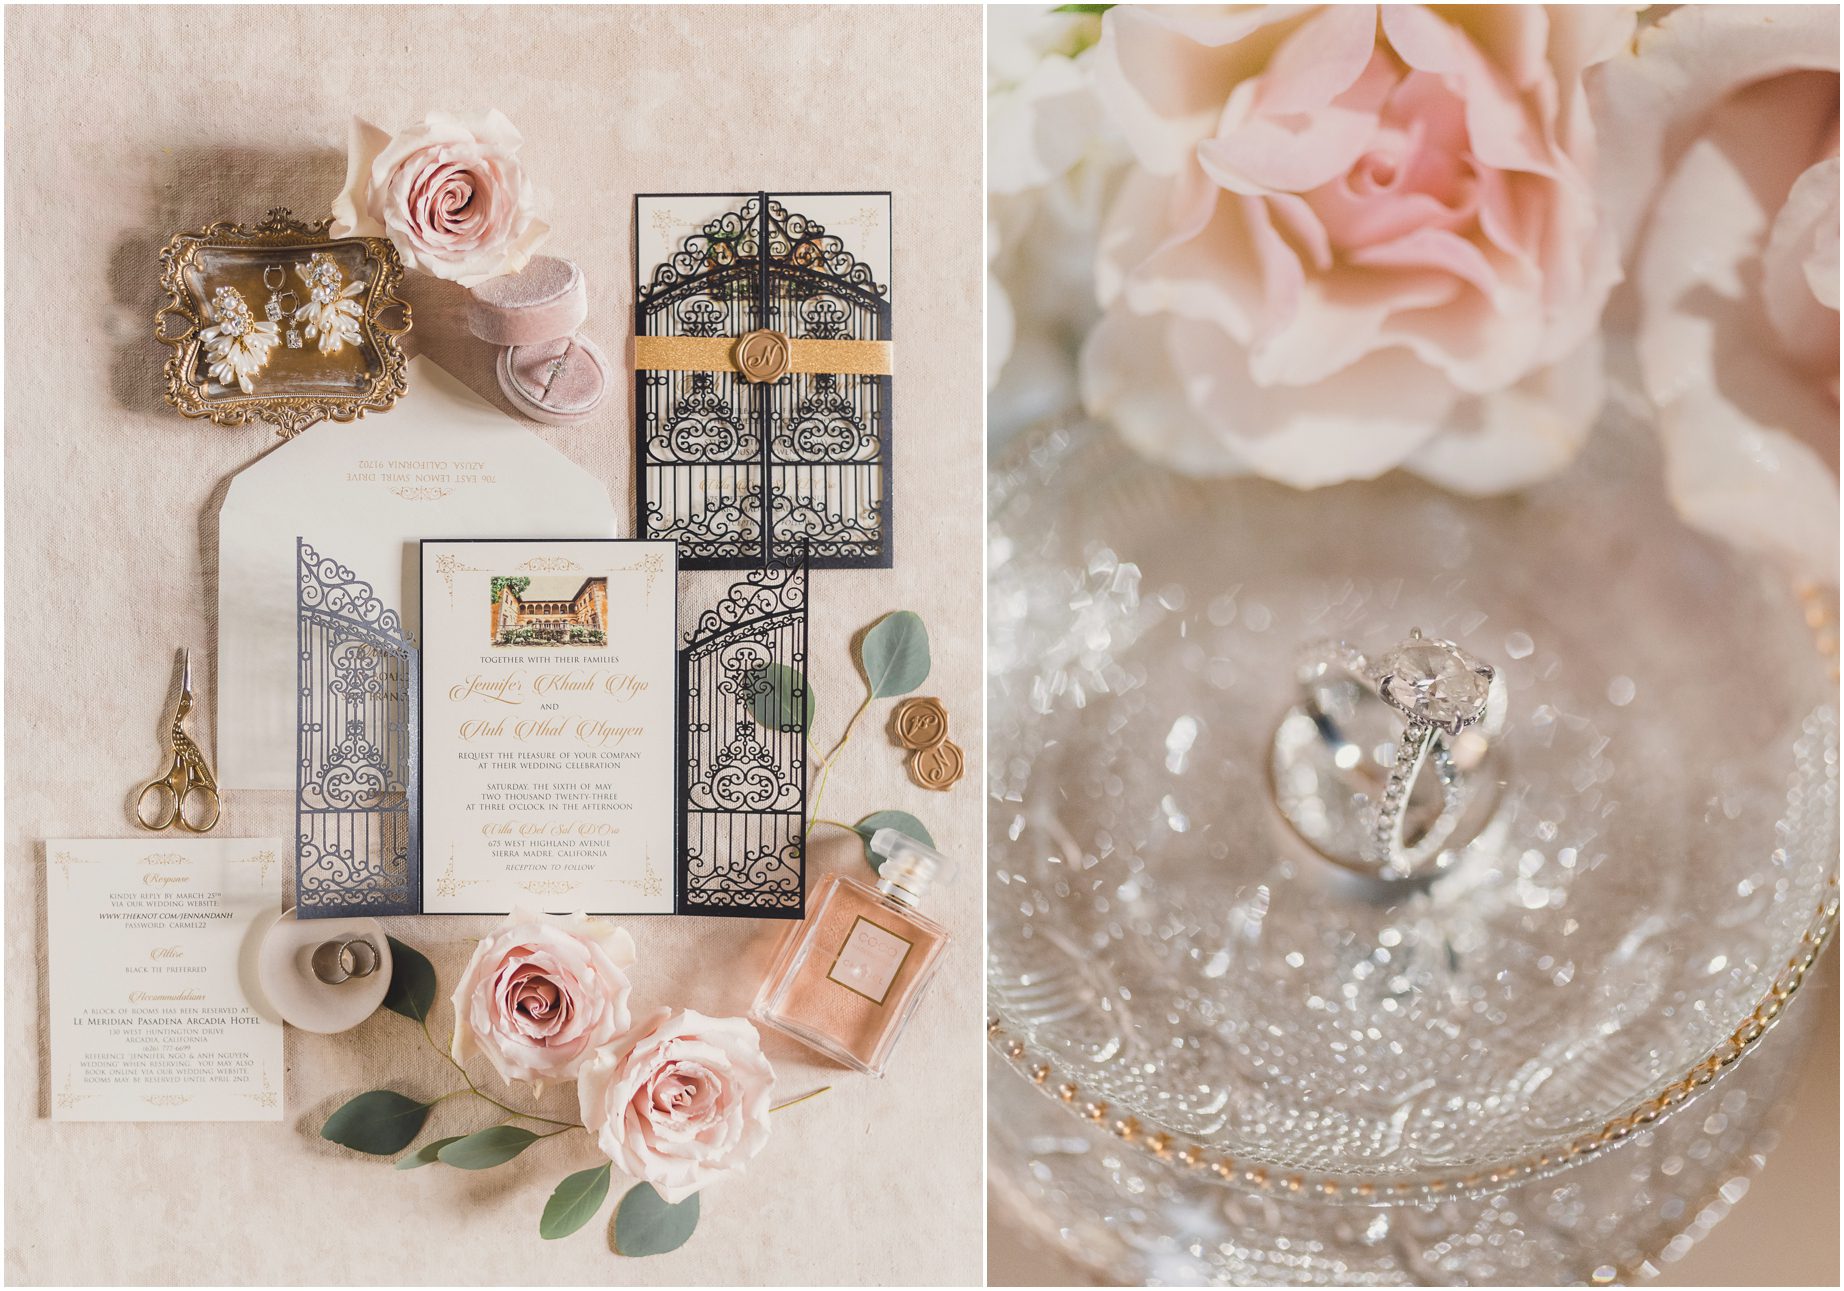 A flat lay featuring wedding invitations to a Villa del sol d'Oro Socal wedding. the invitations feature a wrought iron gate that mirrors the gate at Villa del sol d'Oro, and a painting of the venue. There is also a photograph featuring the wedding rings in a bowl, flanked by pink flowers